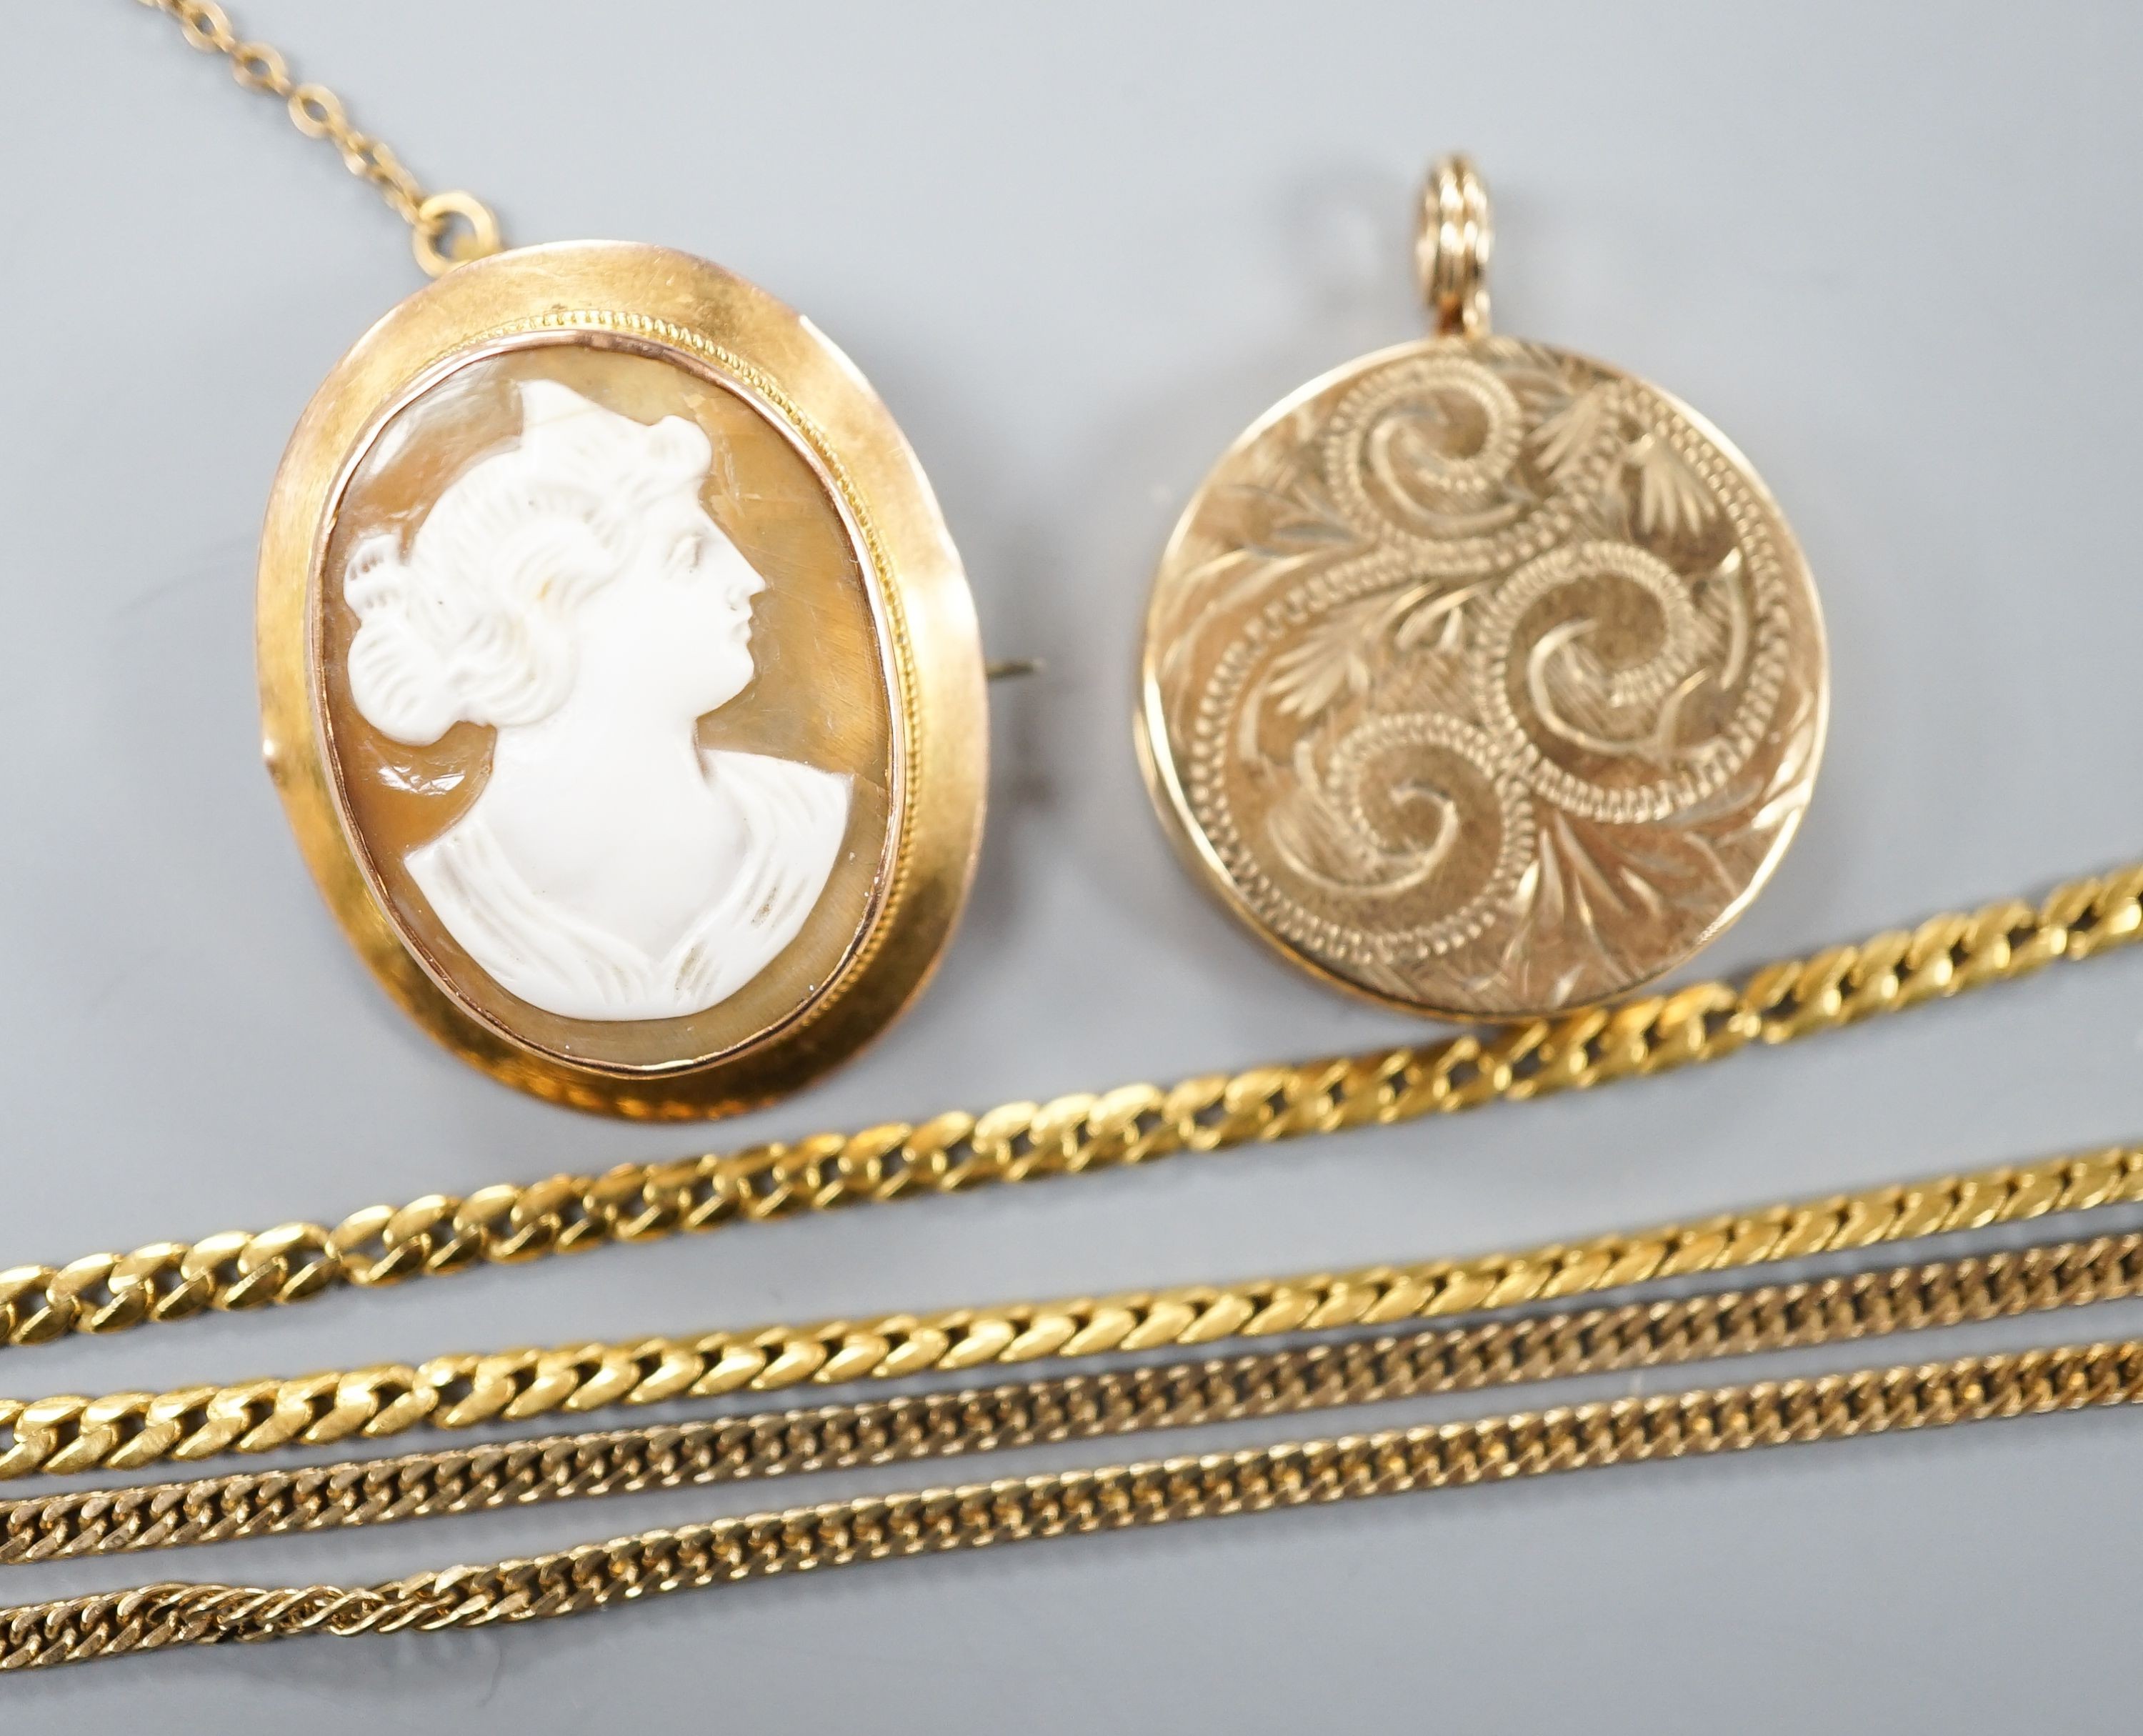 A 9ct gold 'serpent' necklet, 36cm, a 9ct mounted oval cameo shell brooch, a modern 9ct gold locket on a 9ct gold chain, gross 22.1 grams.